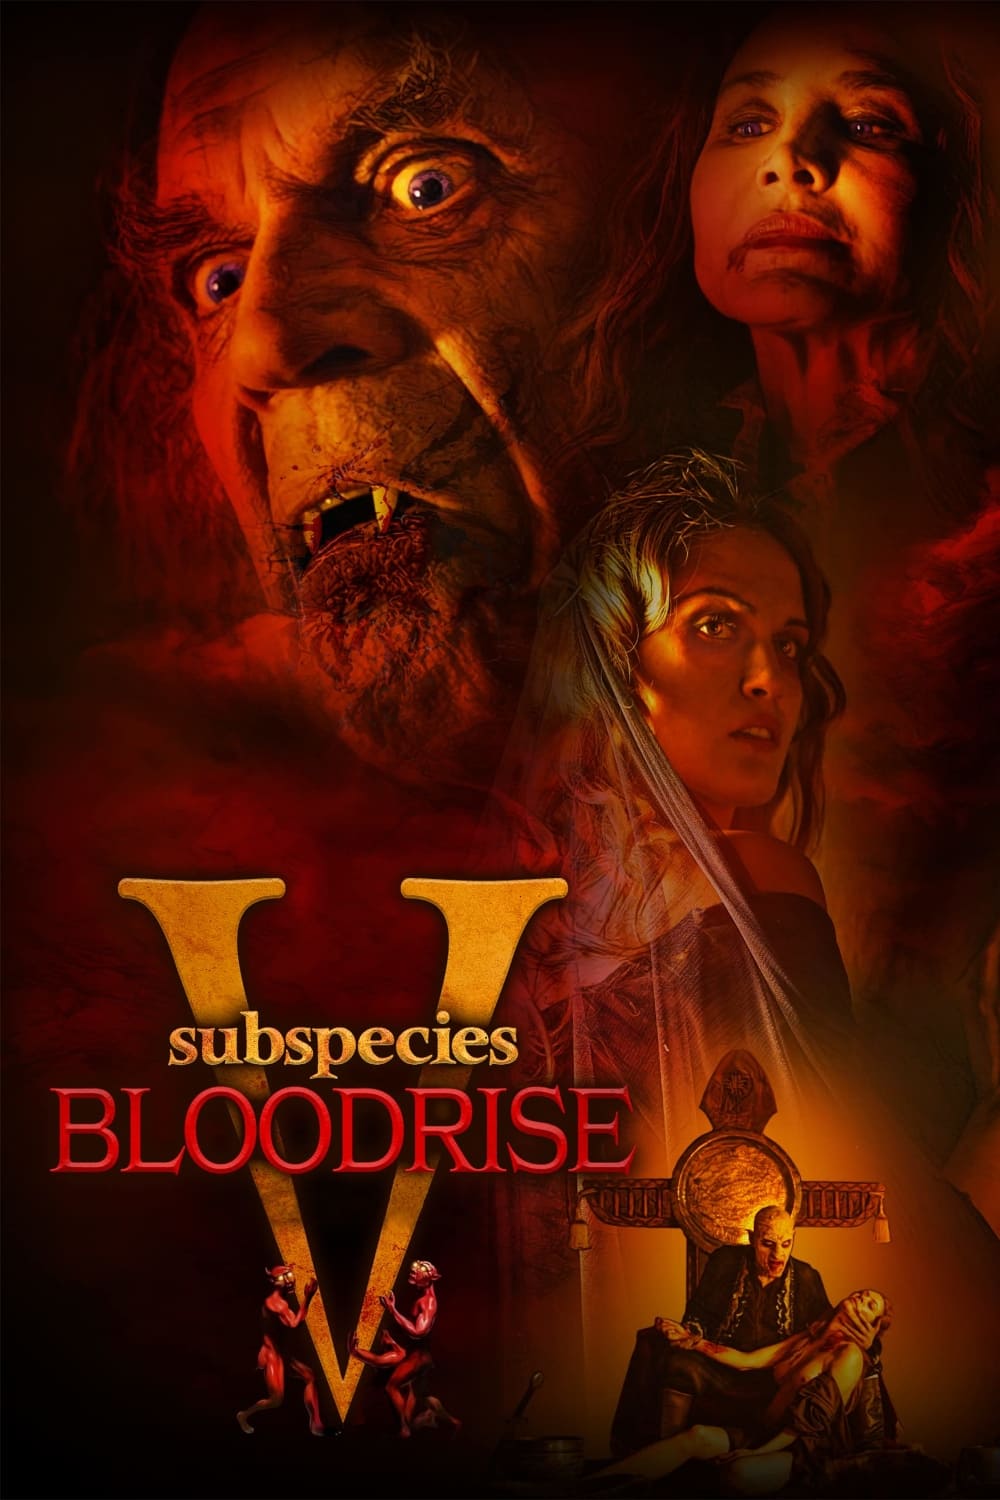 Blood Rise: Subspecies V (2021)